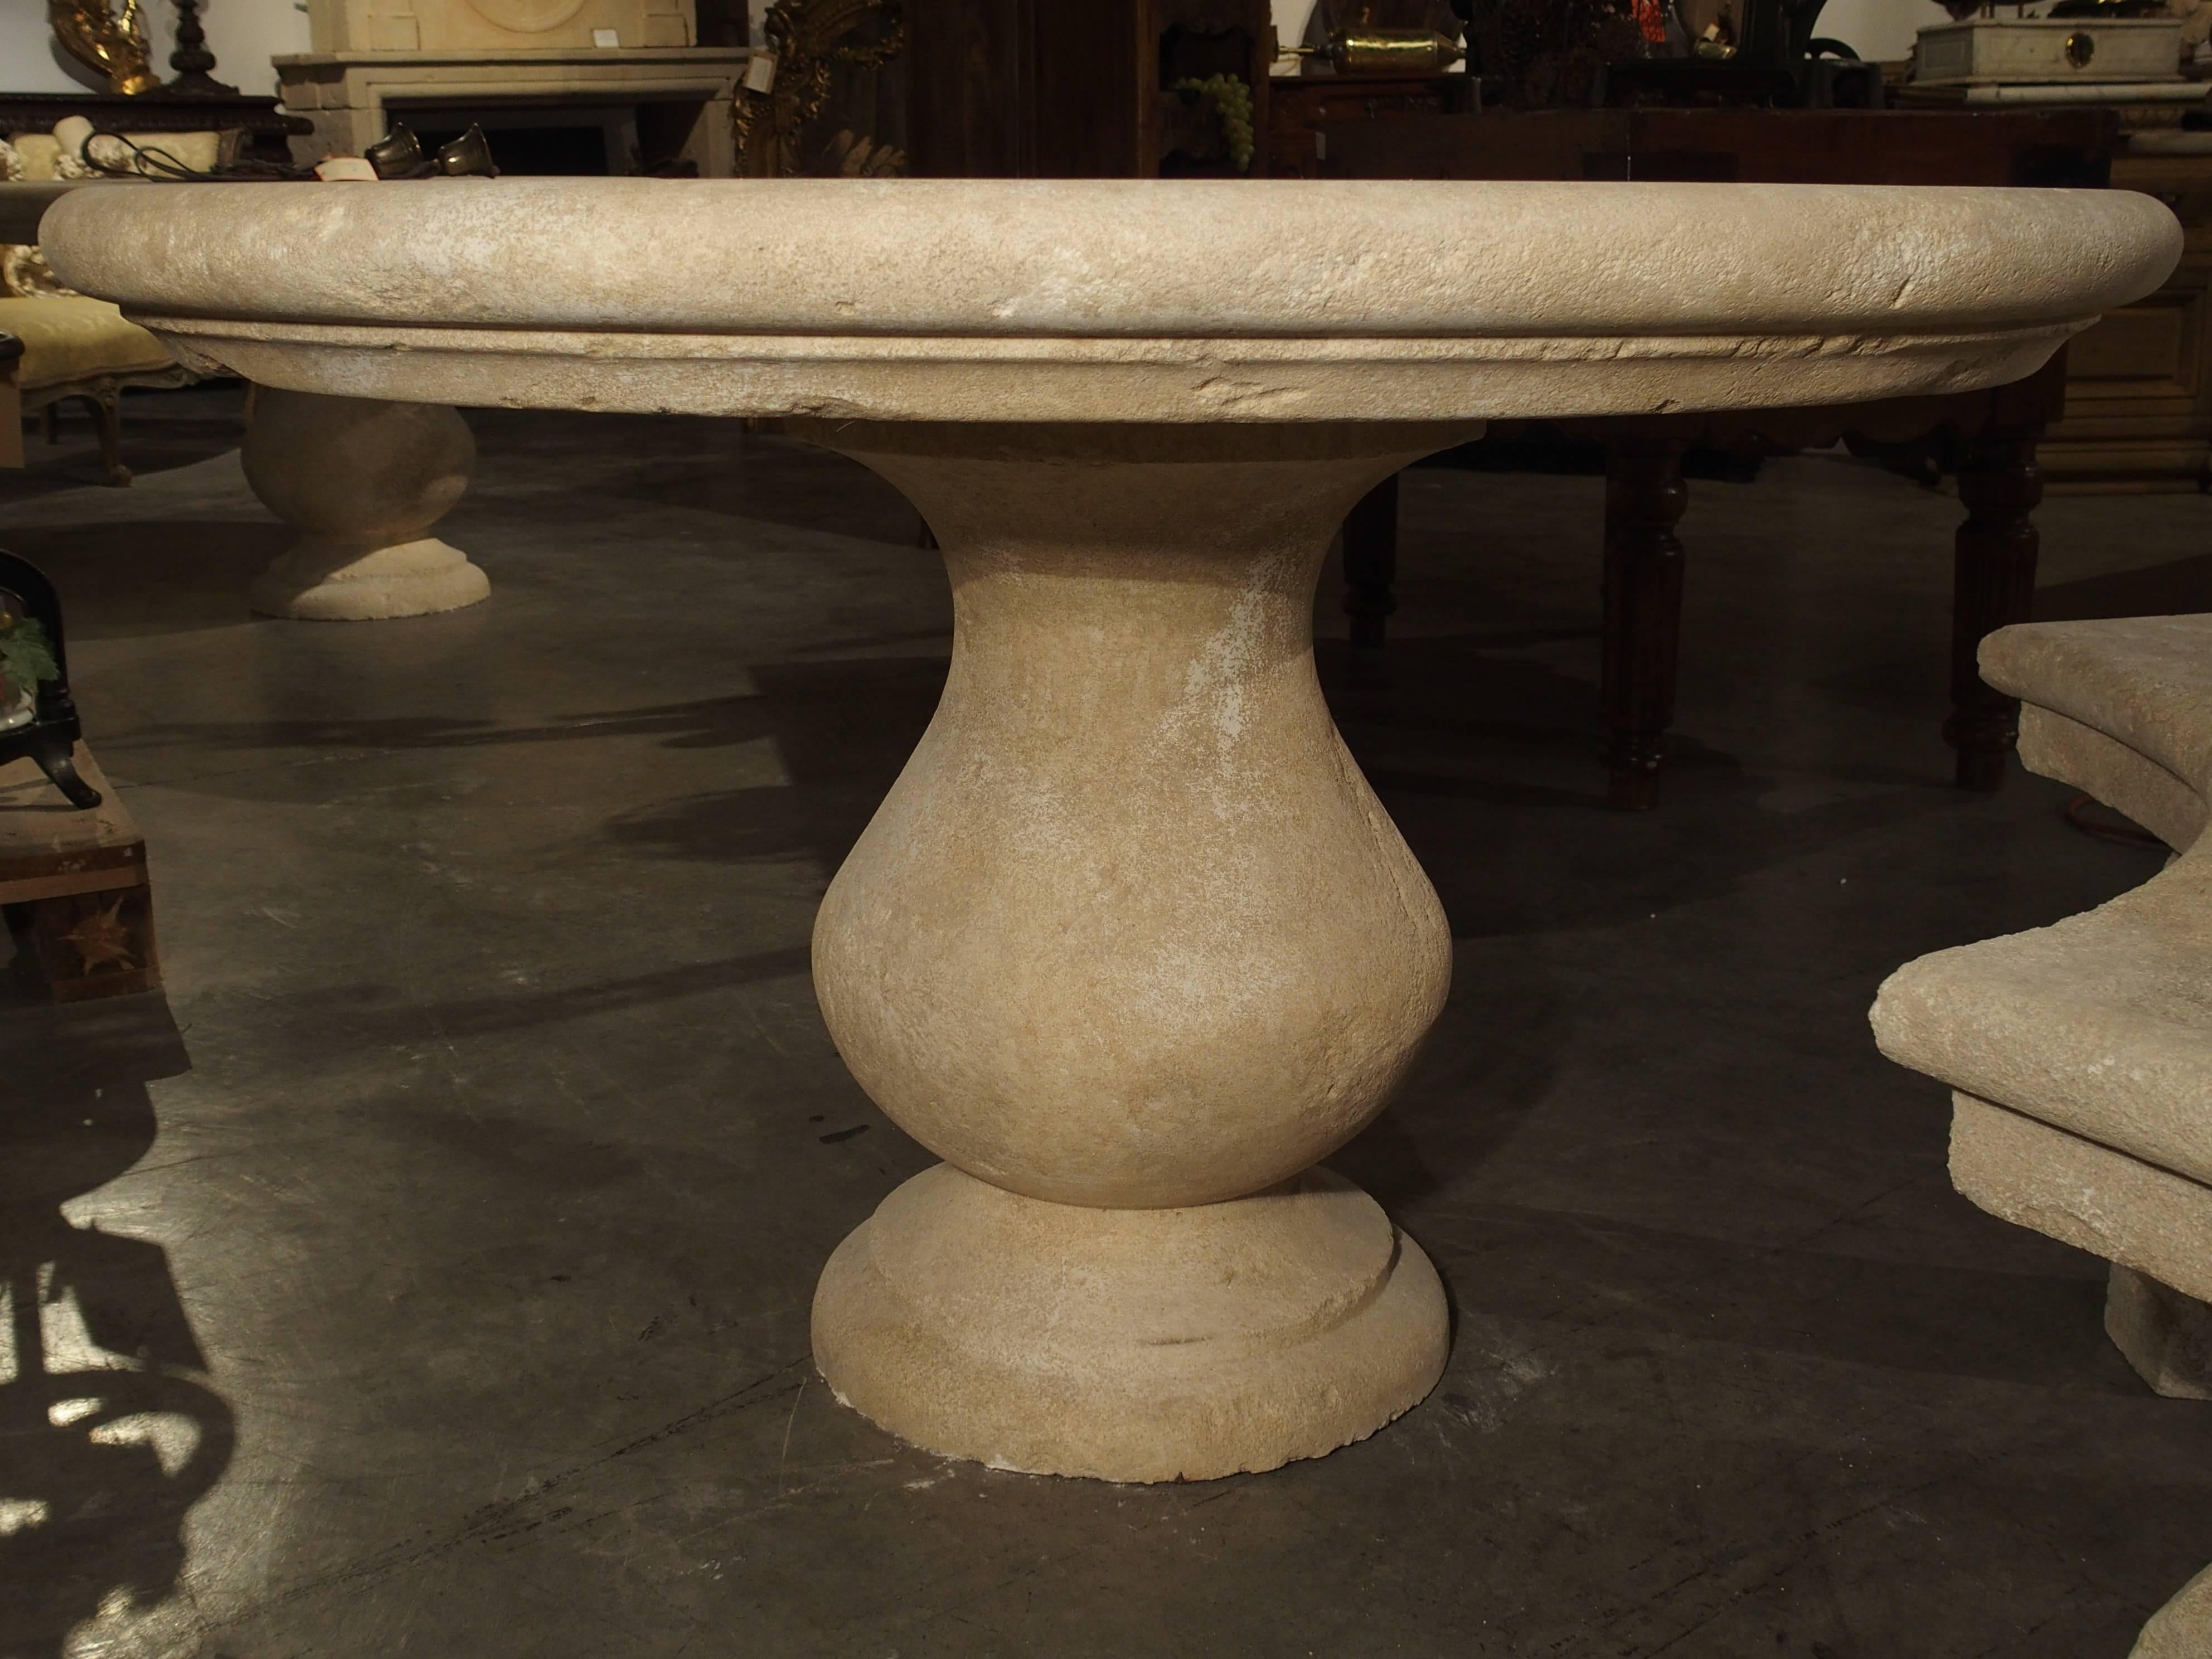 This versatile, hand carved, round stone table from France can be used outside as well as inside. It is made of French estaillade limestone, which has been used for centuries in the creation of outdoor pieces. The rounded edge top sits on a large,